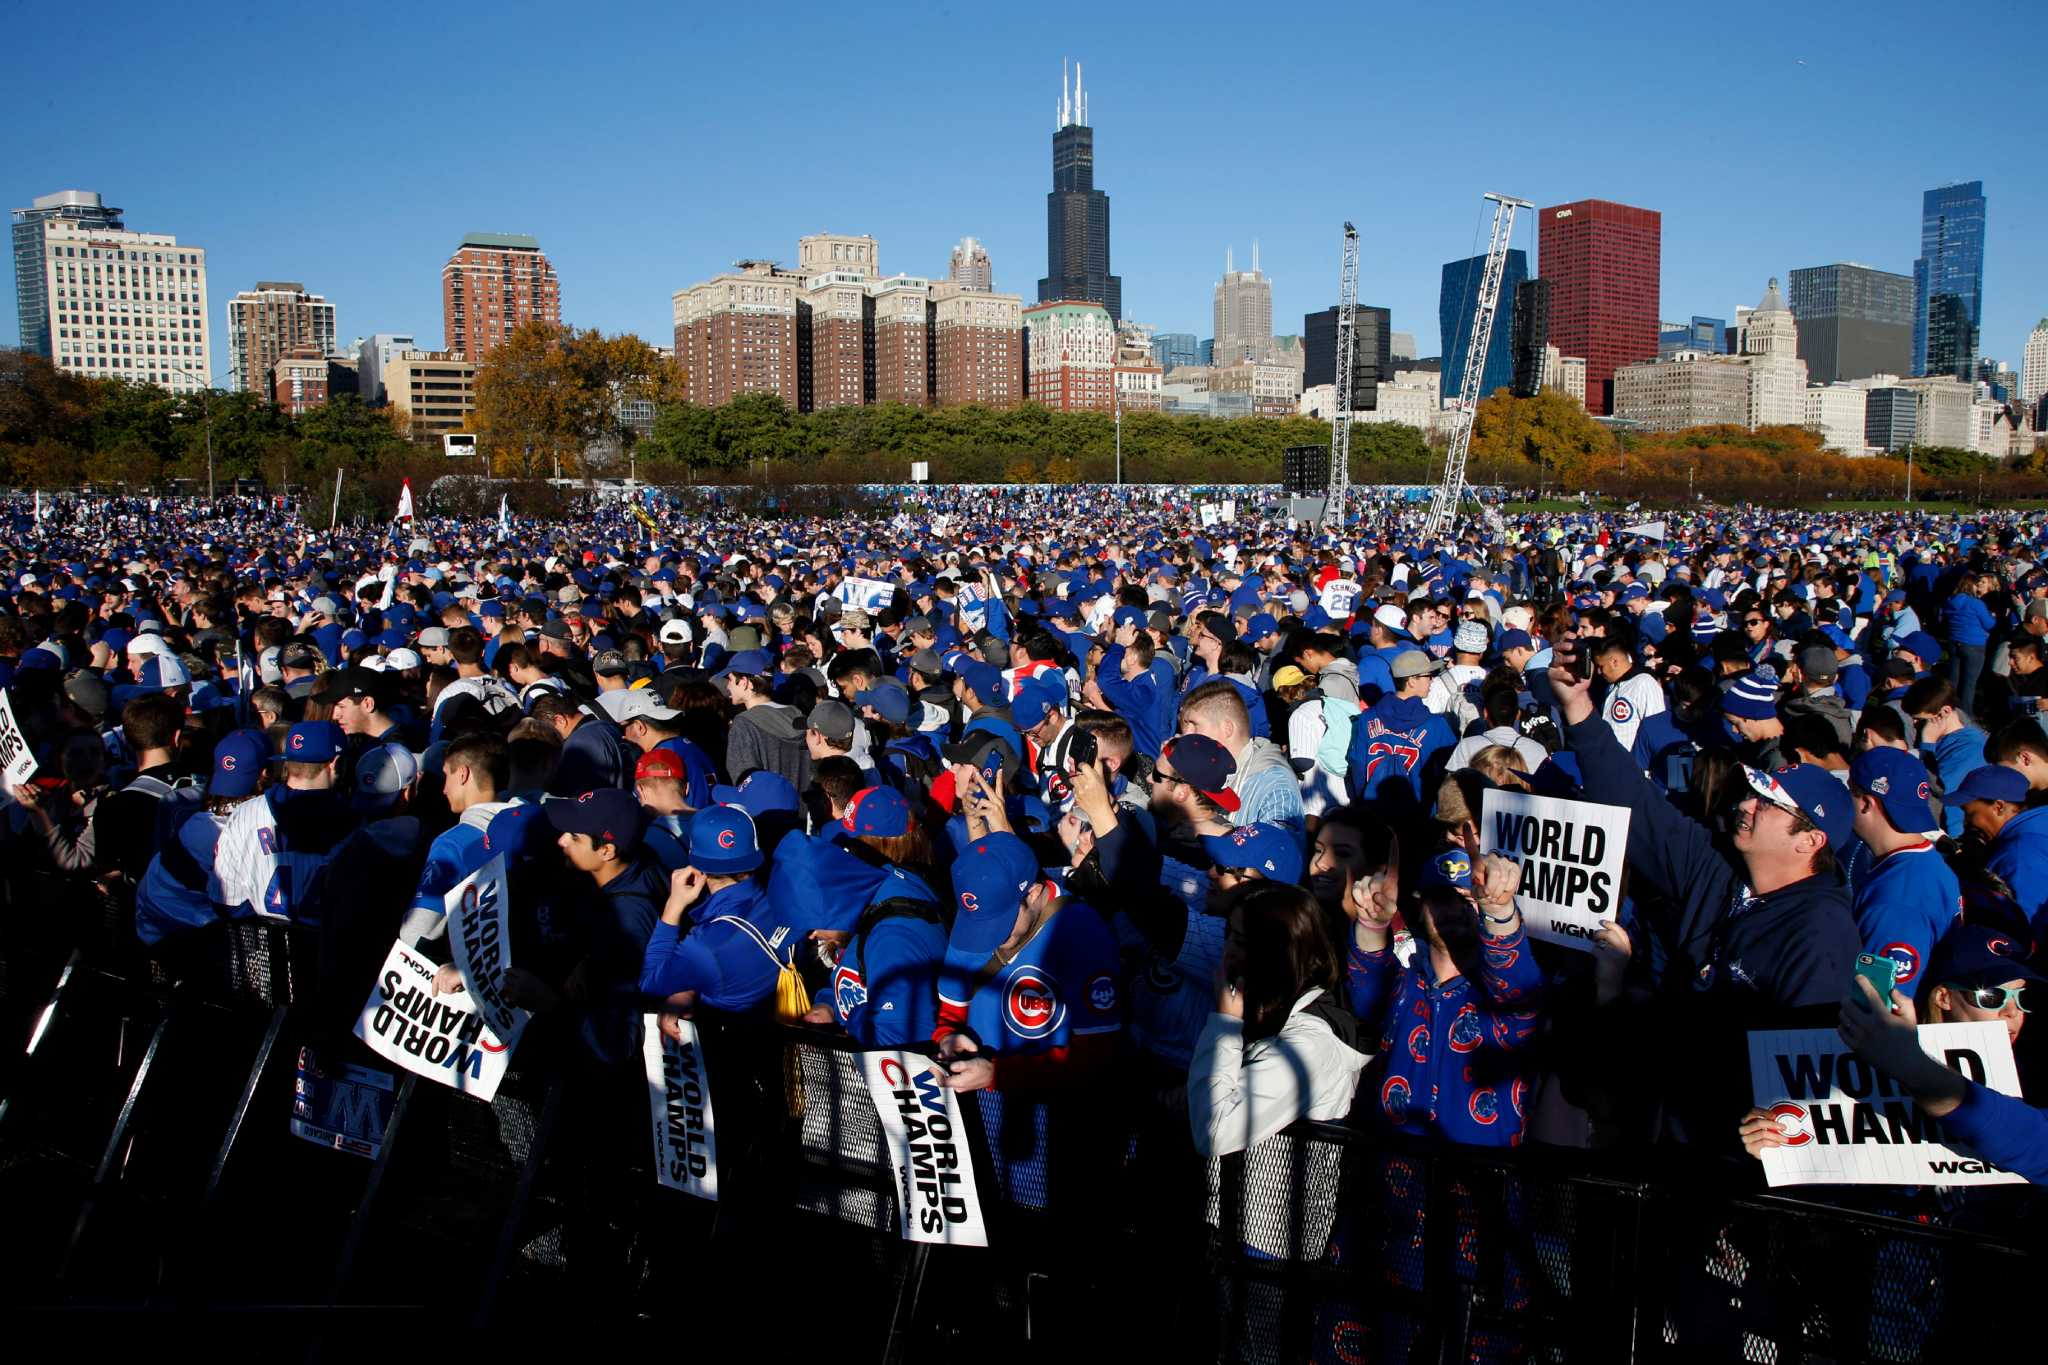 Cubs celebrate World Series win with parade